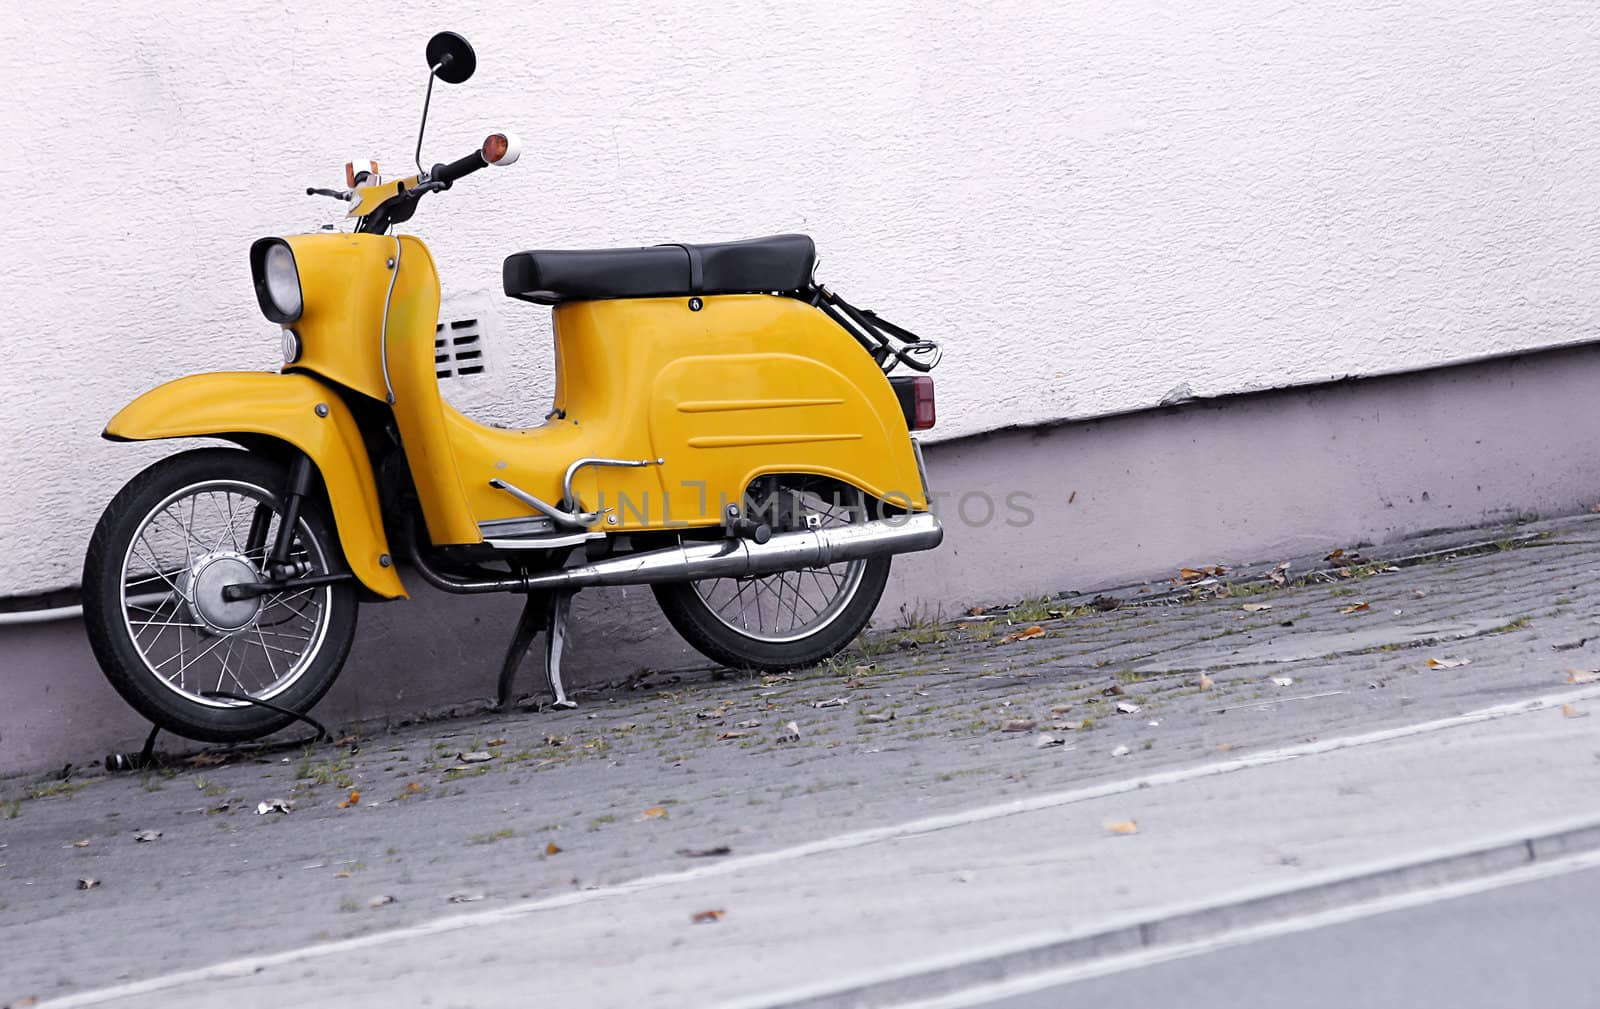 old yellow scooter in retro look design